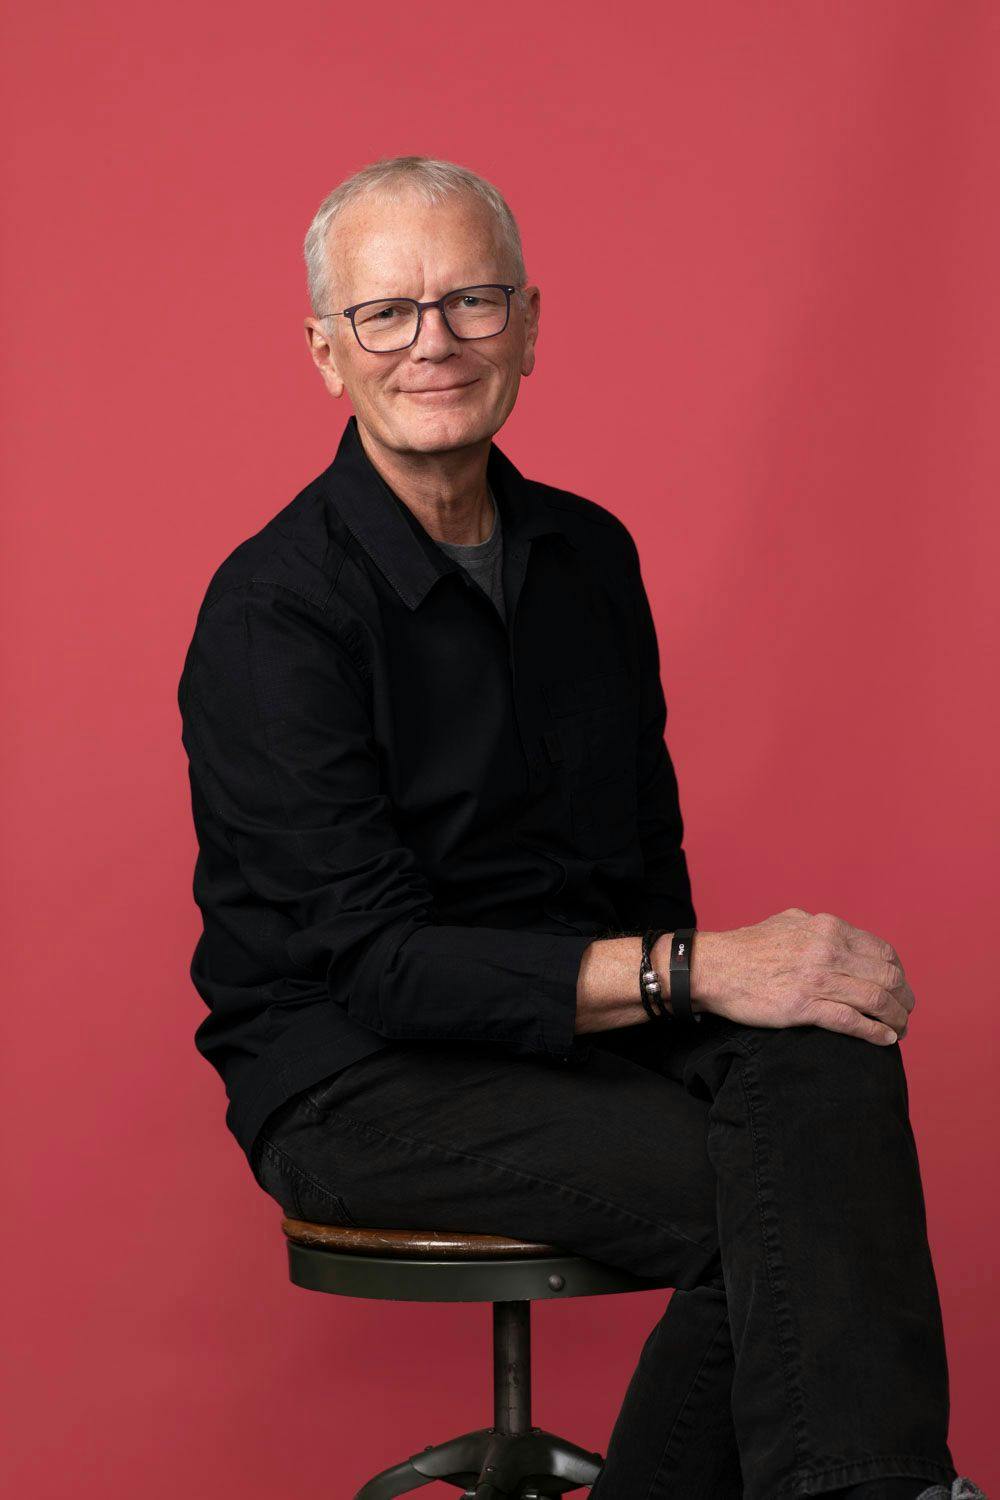 Richard Shear sitting on a stool against a red backdrop.